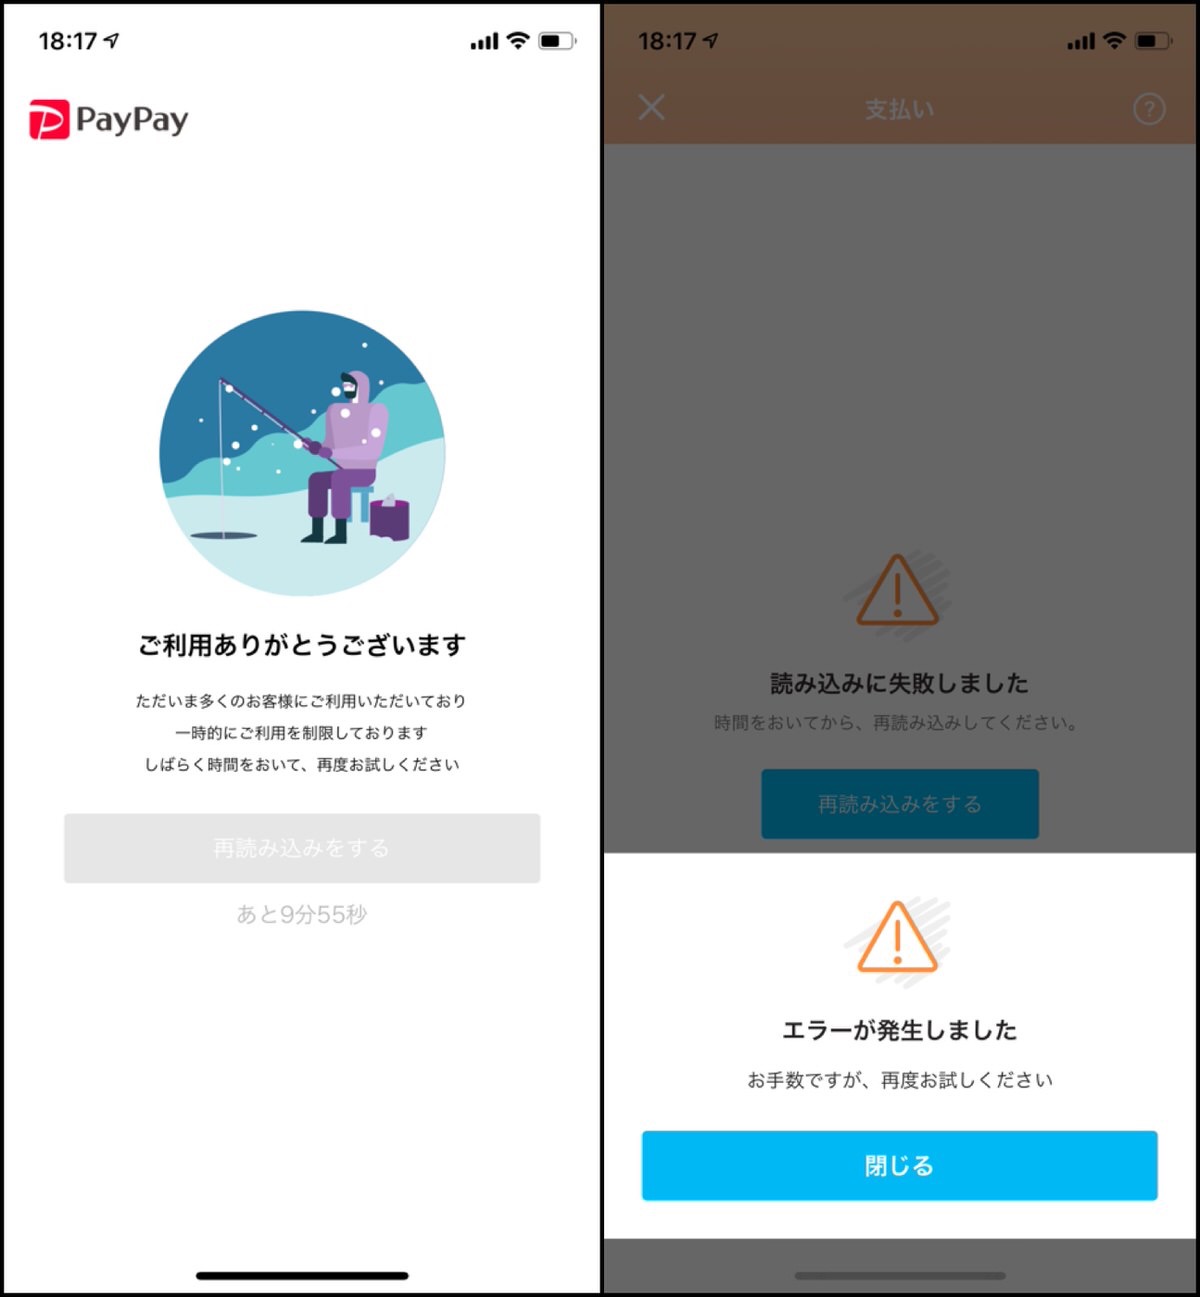 PayPay-2